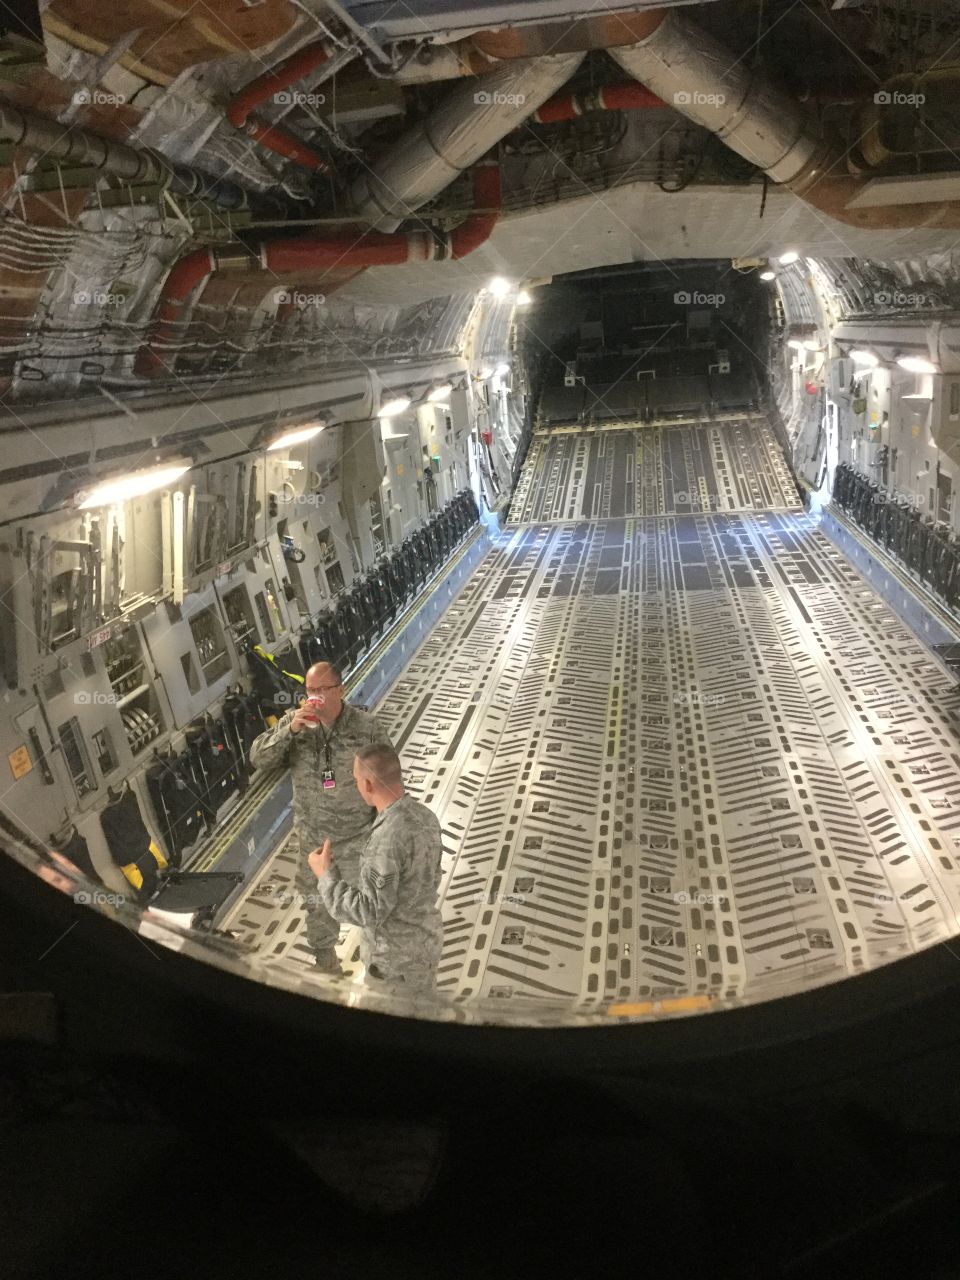 From the cockpit of the massive C-17